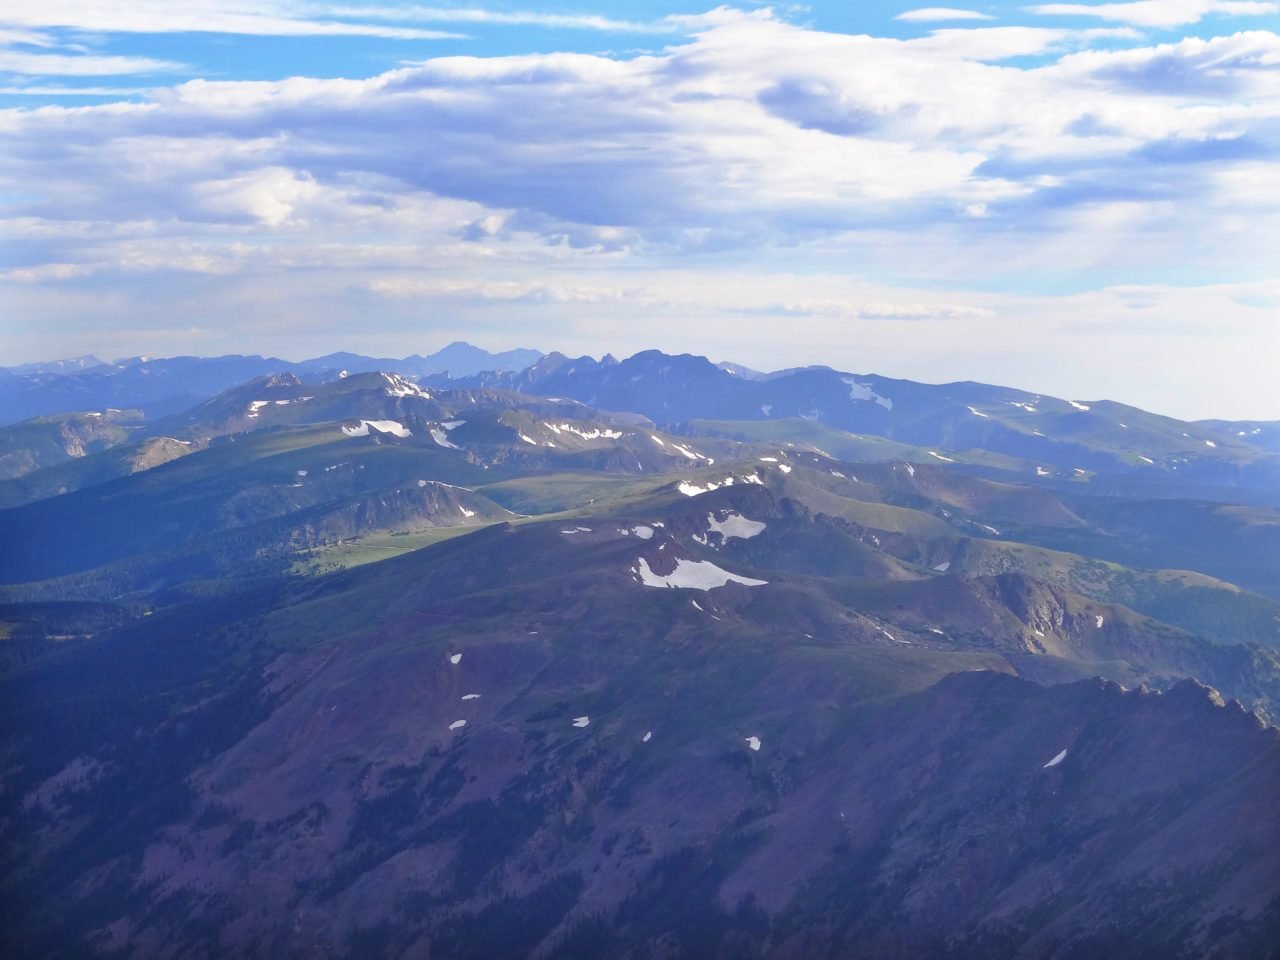 Northern view from Parry Peak of the Indian Peaks Wilderness and Rocky Mountain National Park